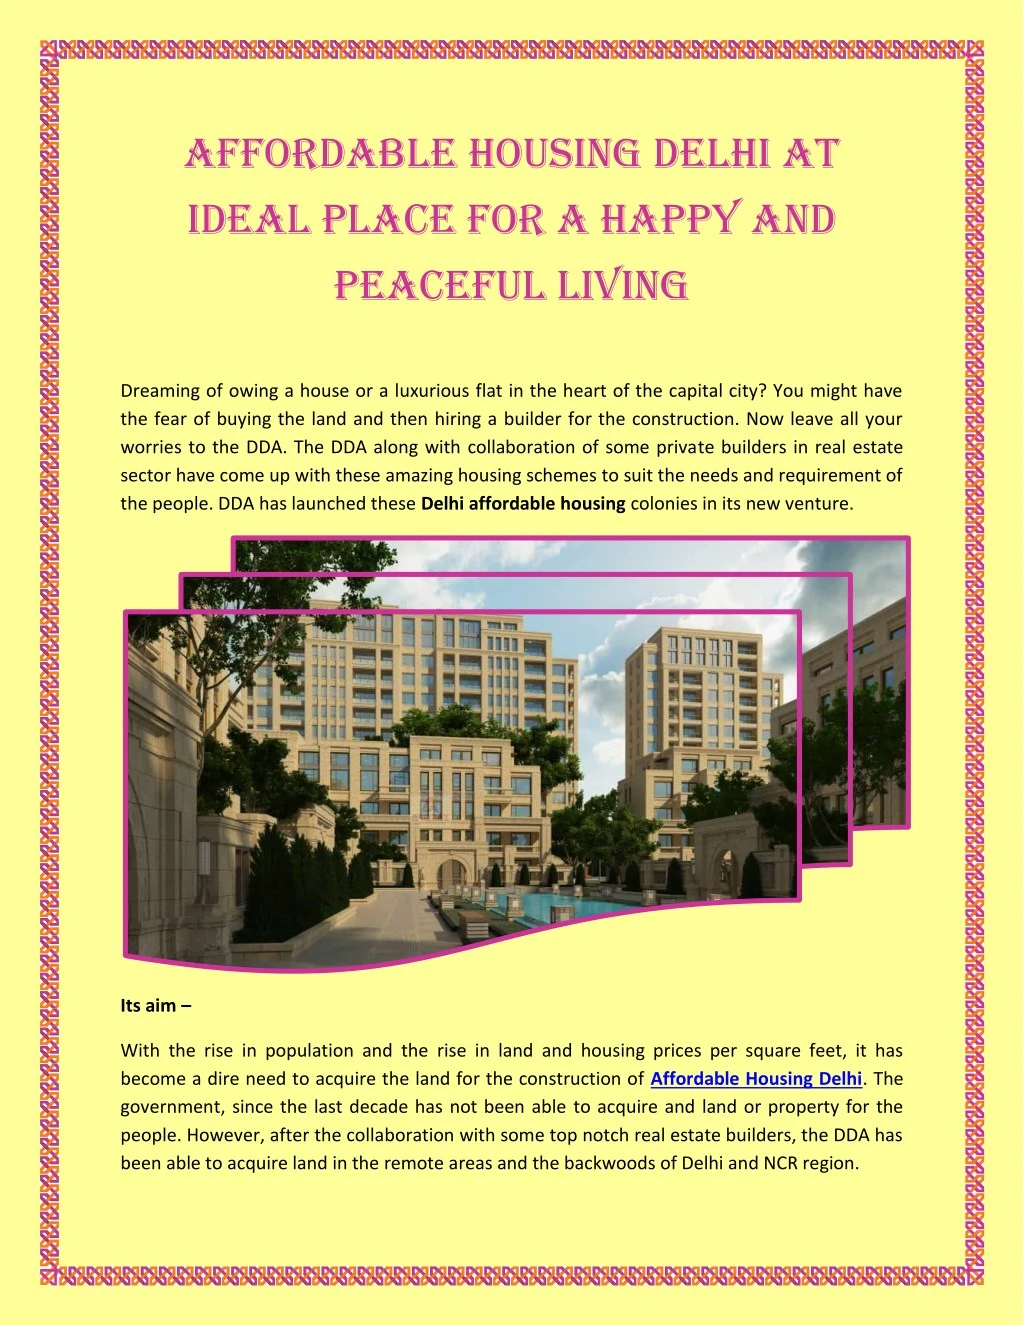 affordable housing delhi at ideal place